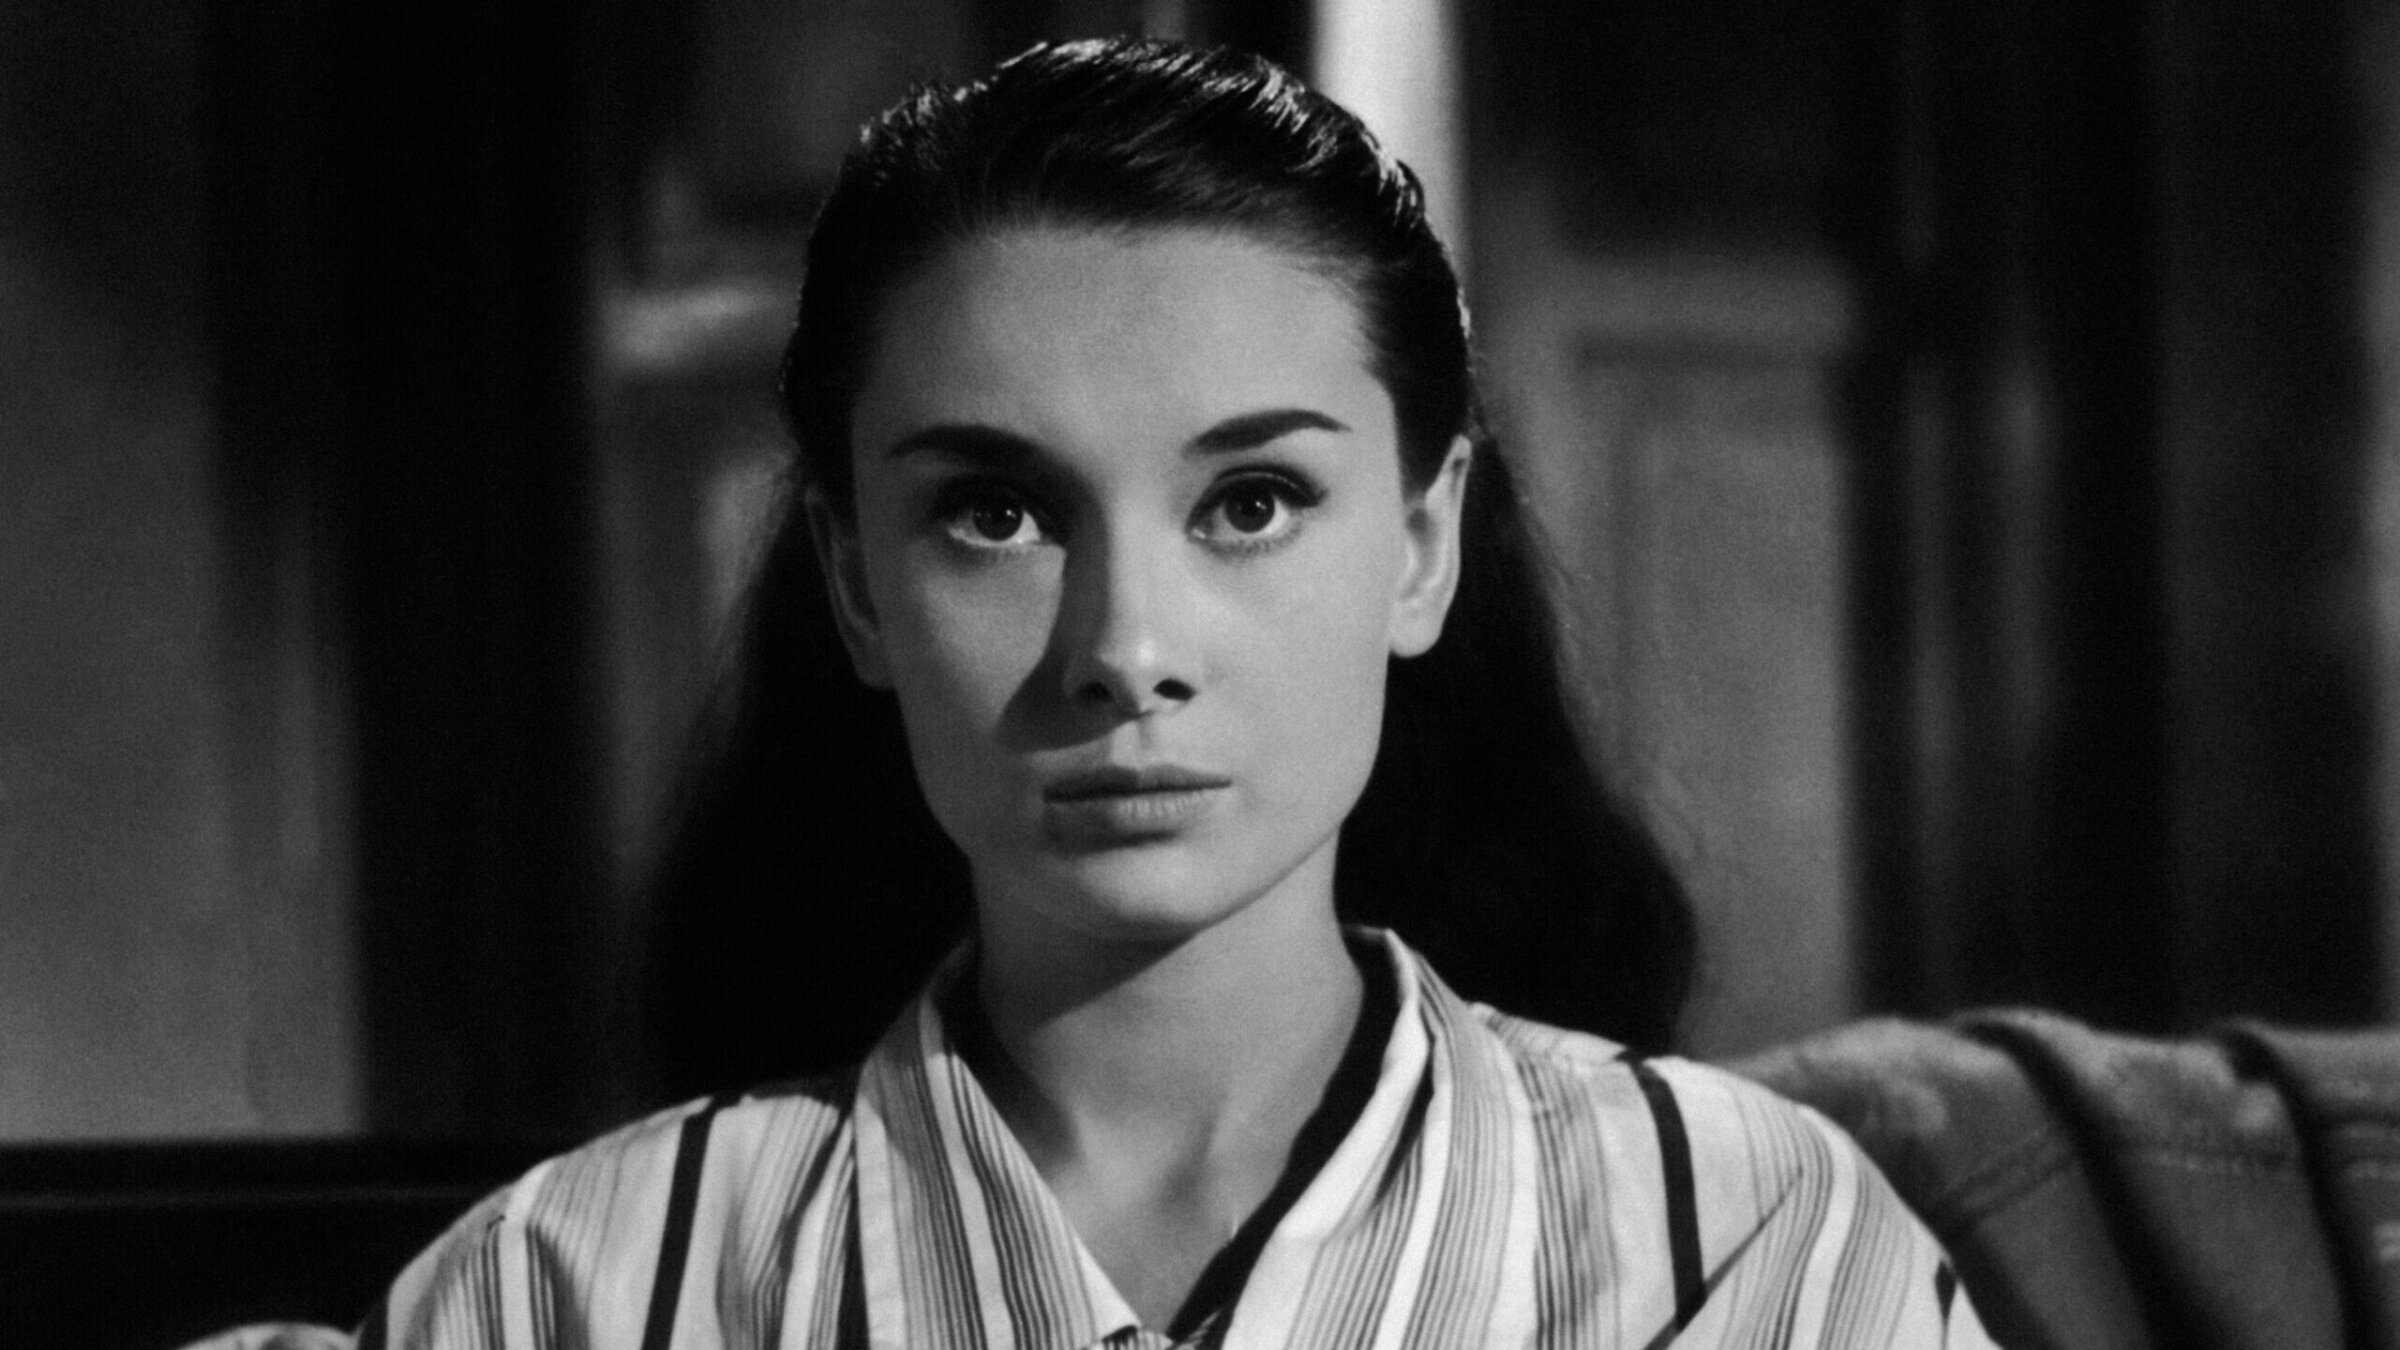 Before an international talent search began, Audrey Hepburn was favored to play the title role in the 1959 film of <i>The Diary of Anne Frank.</i>